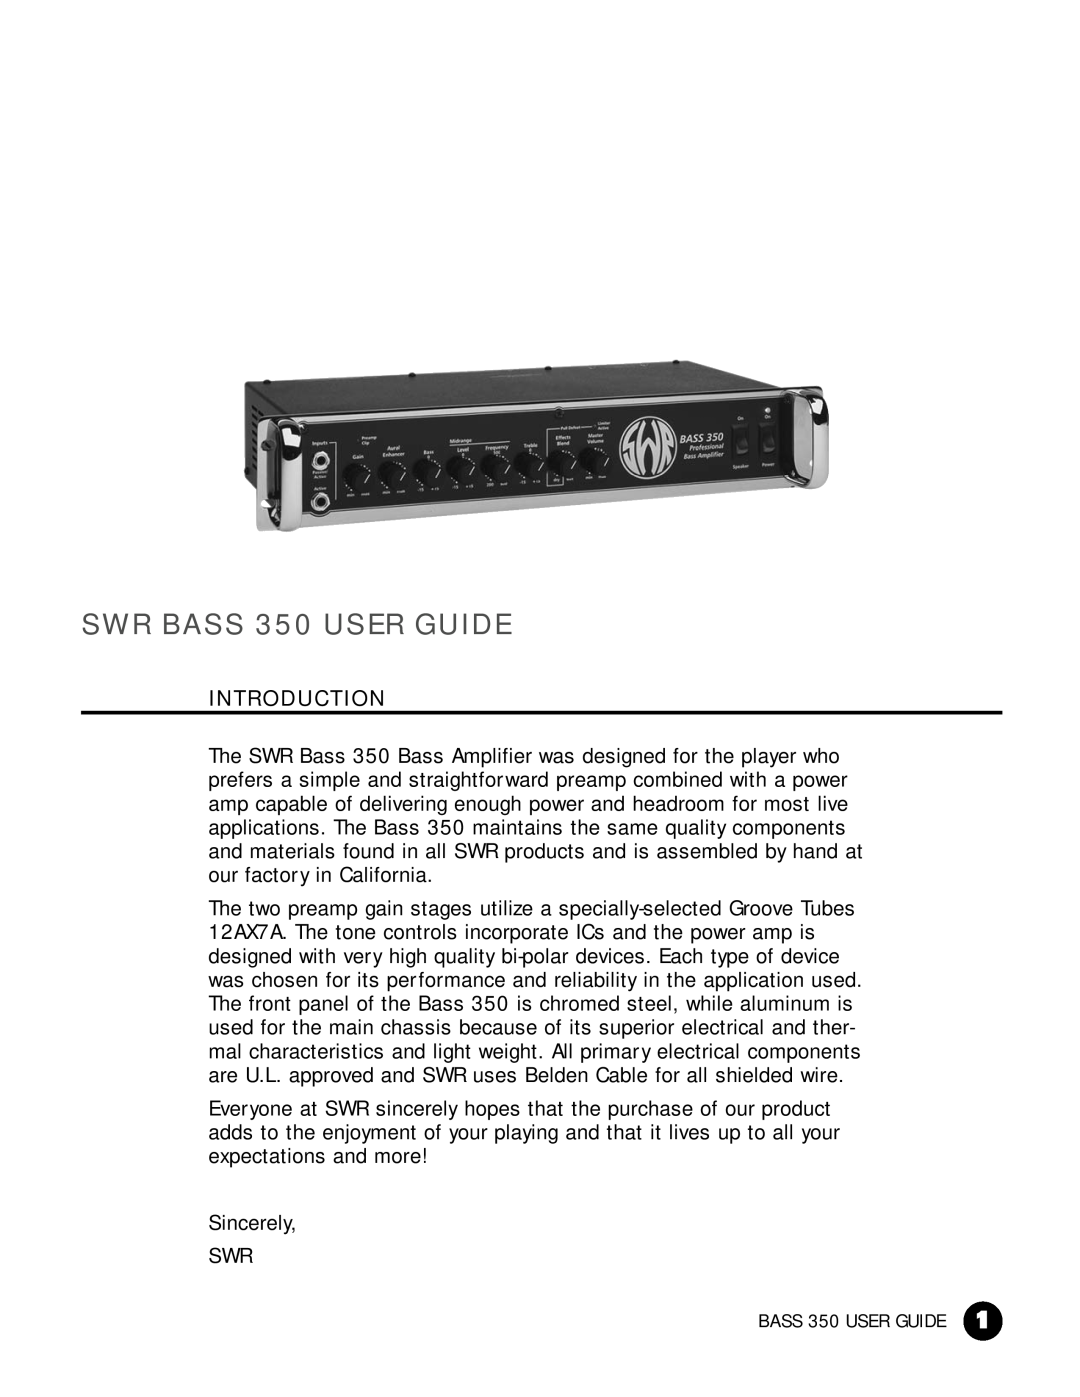 SWR Sound manual Introduction, SWR BASS 350 USER GUIDE 